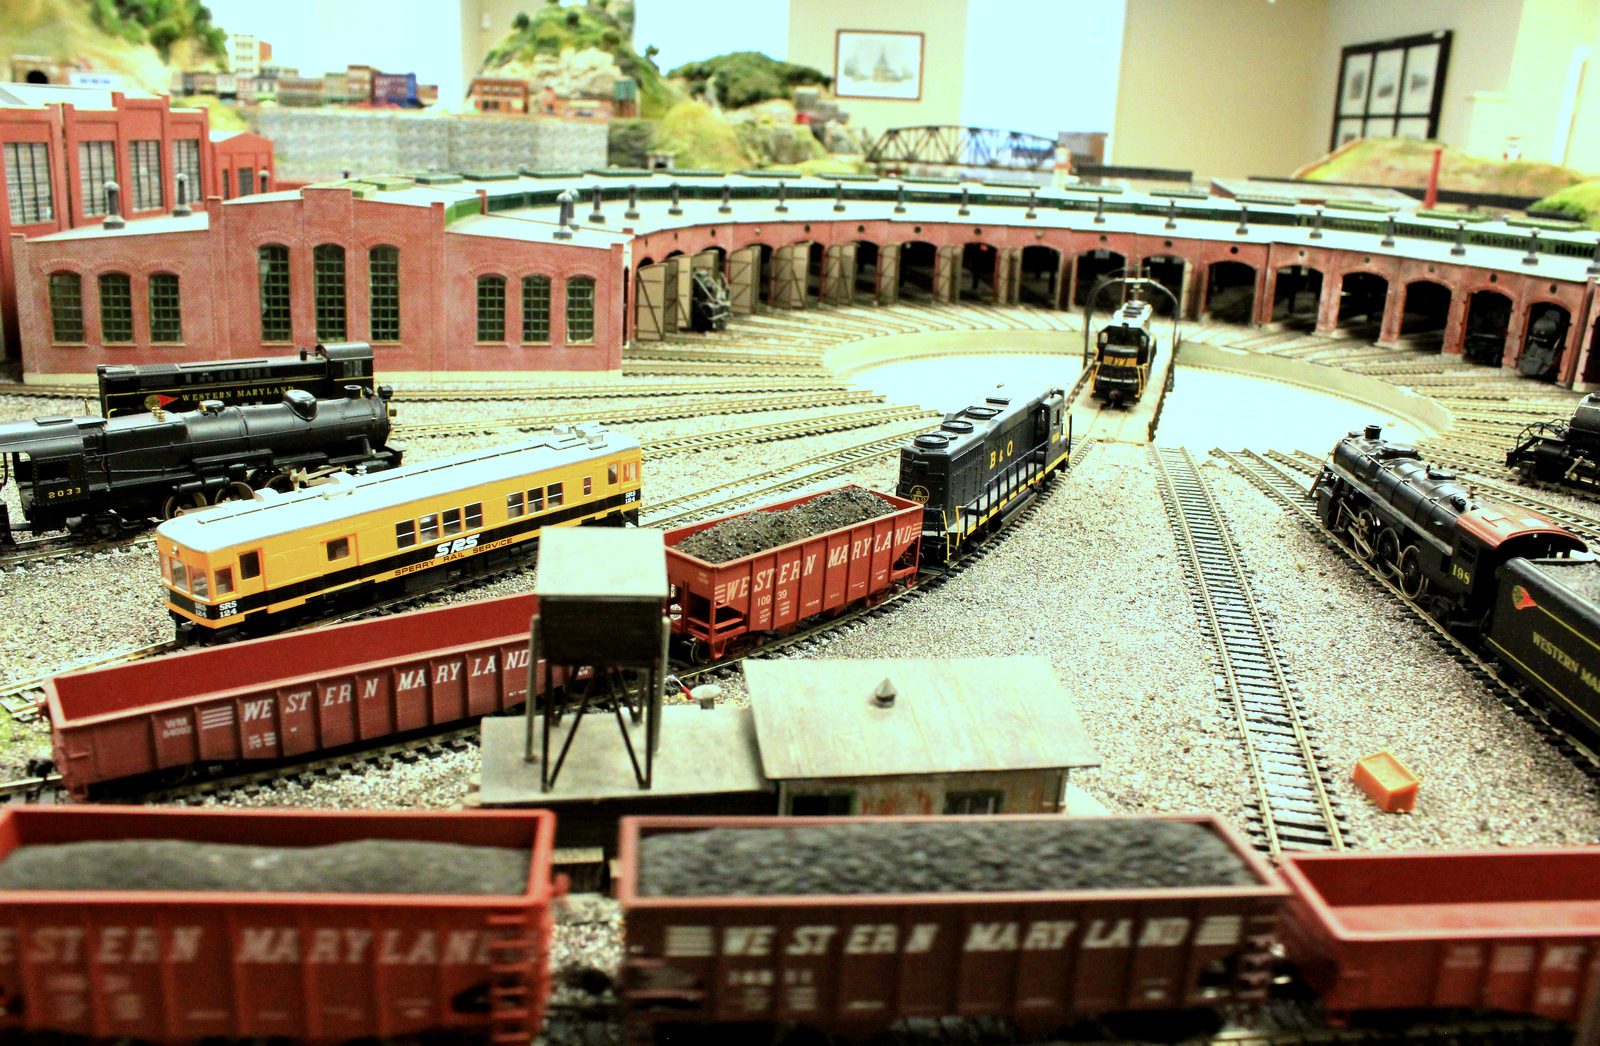 A model train layout of the A photo of the gift shop at the Model train layout at the Hagerstown Roundhouse.